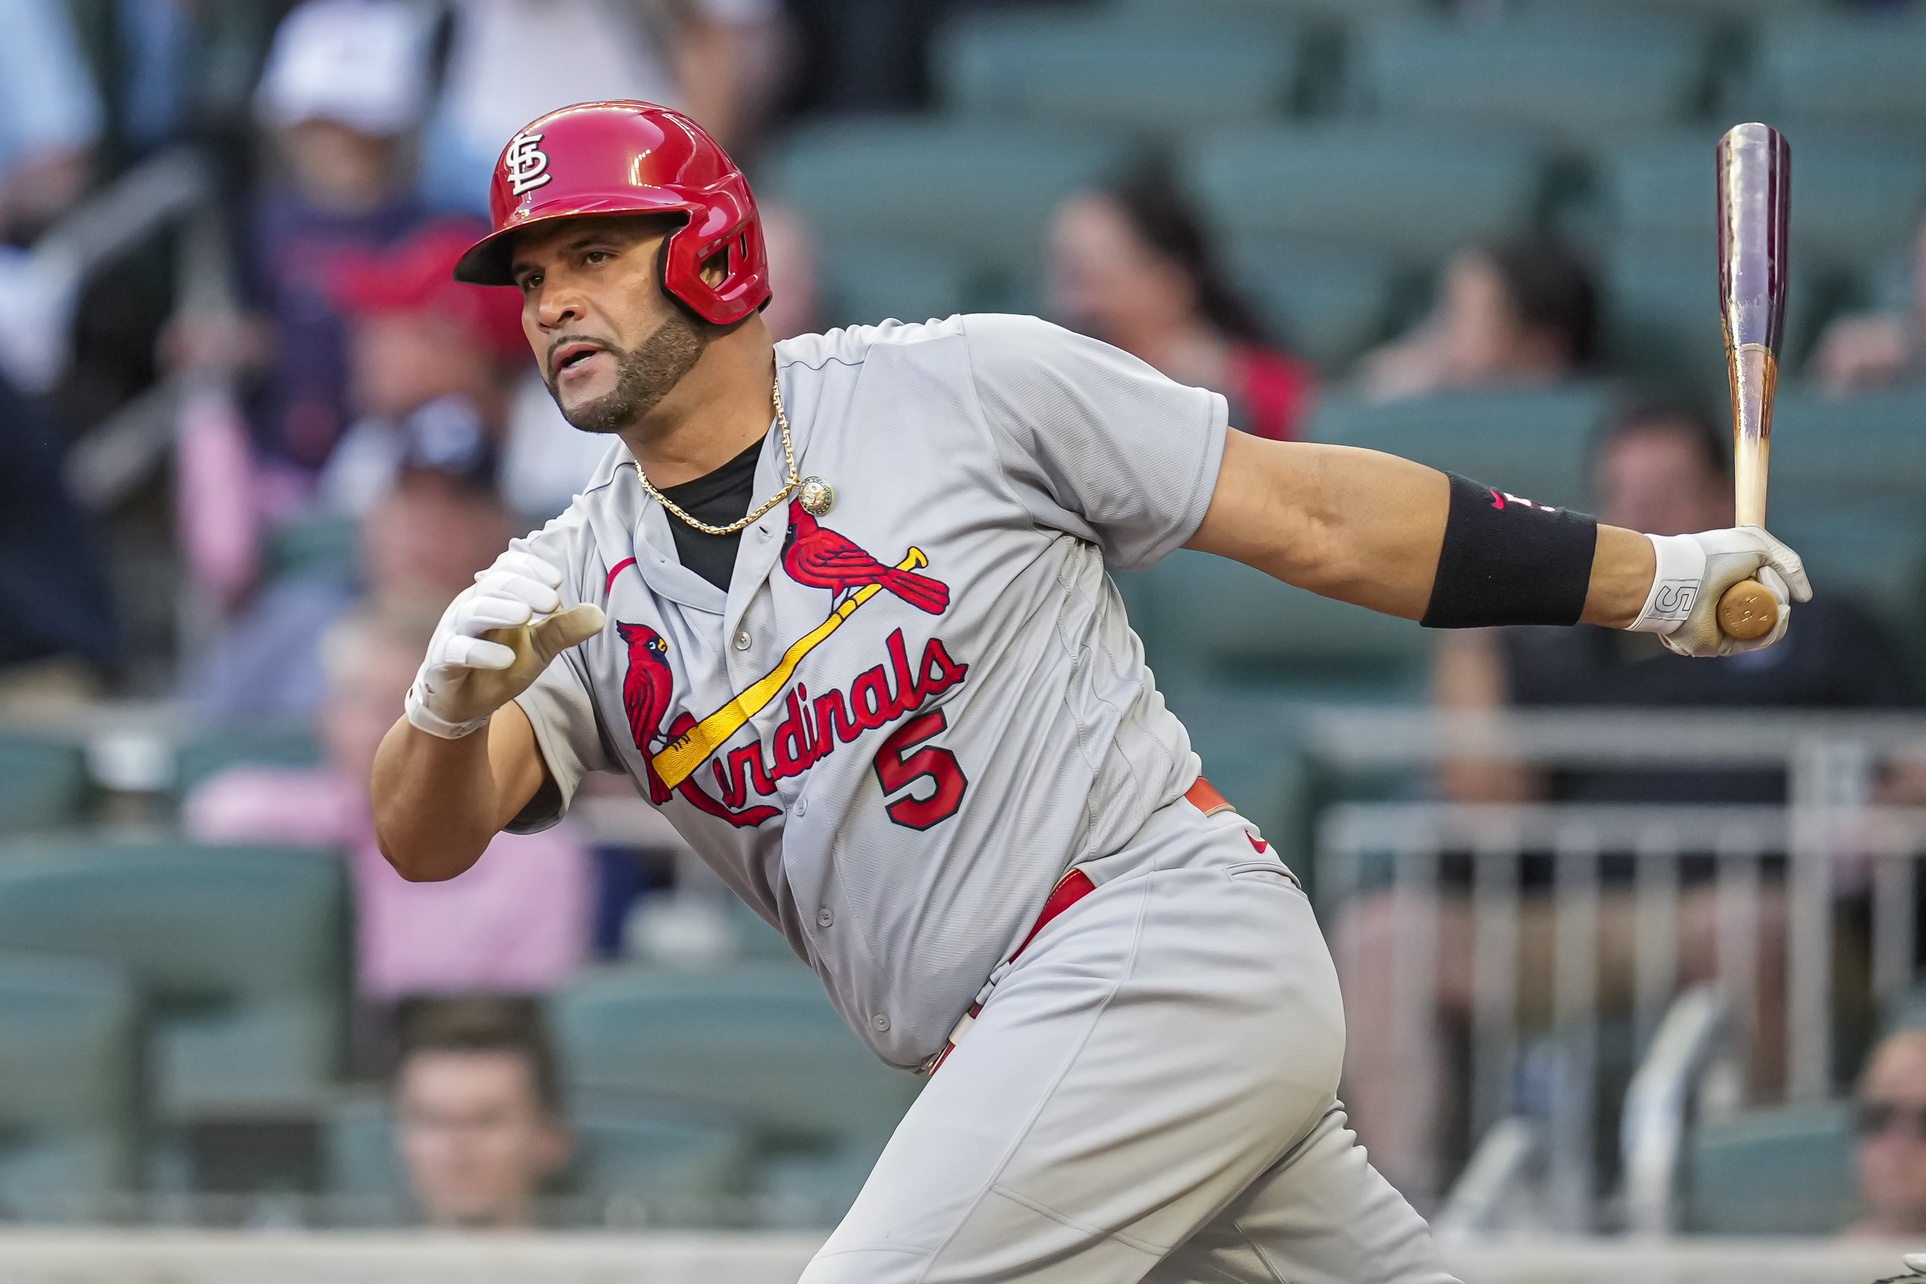 Albert Pujols has now played all but two positions in his legendary